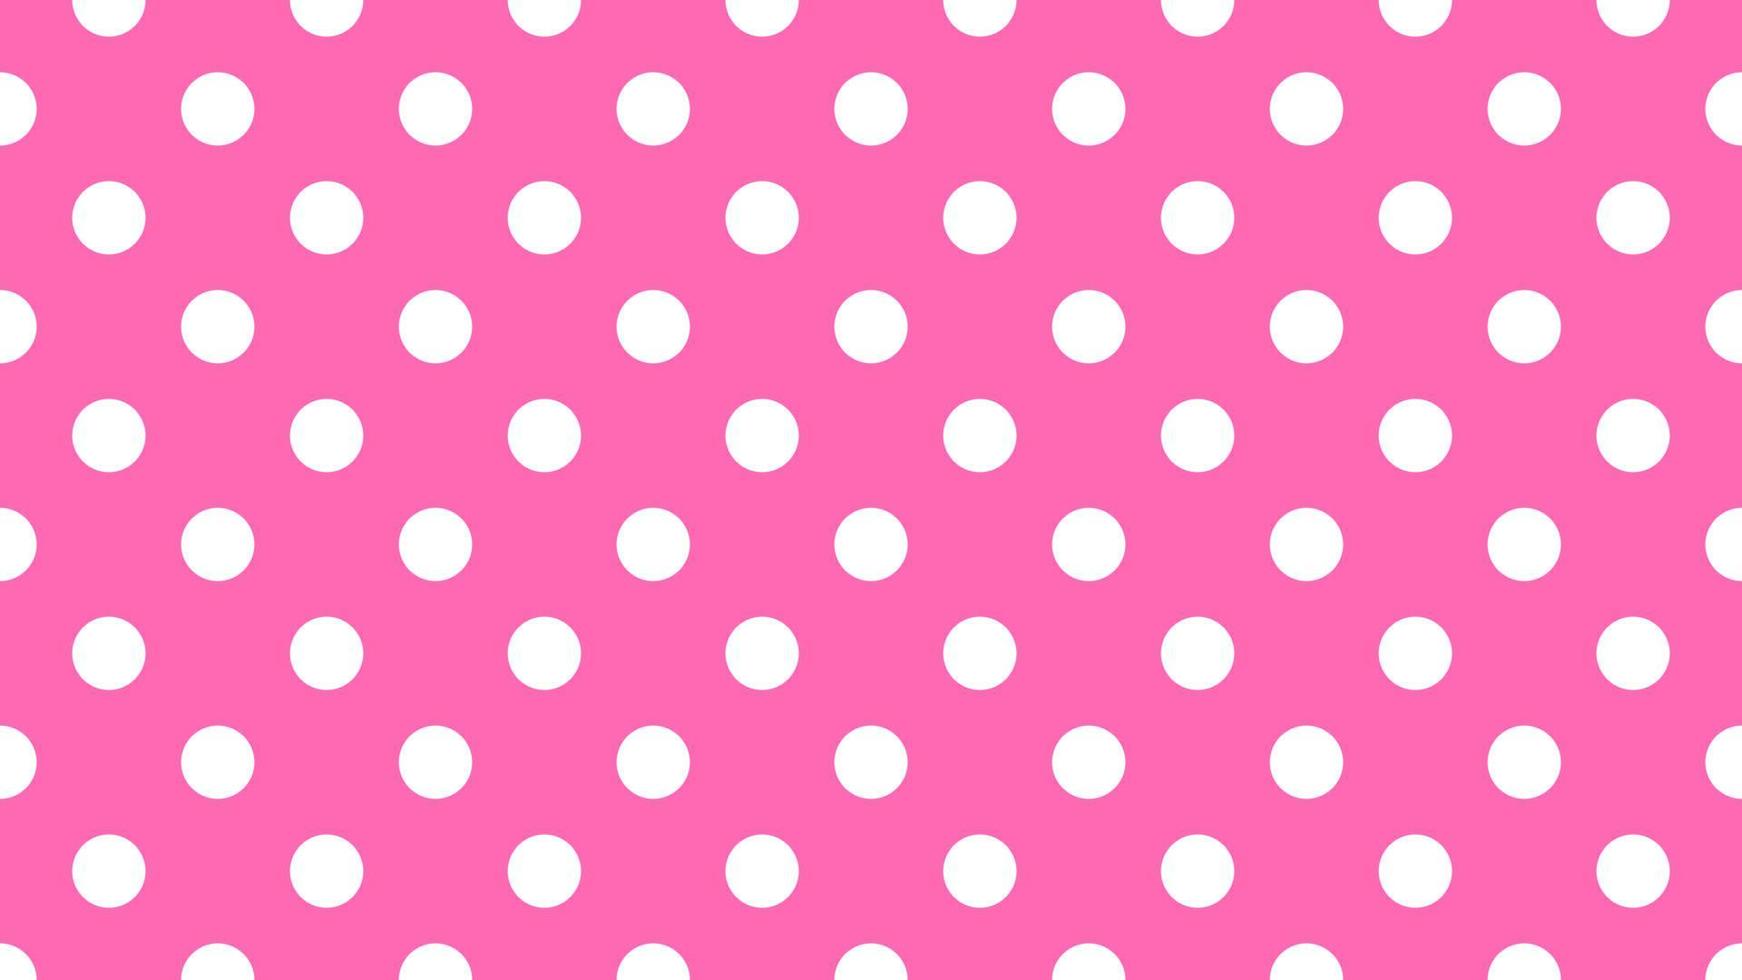 white color polka dots over hot pink background vector